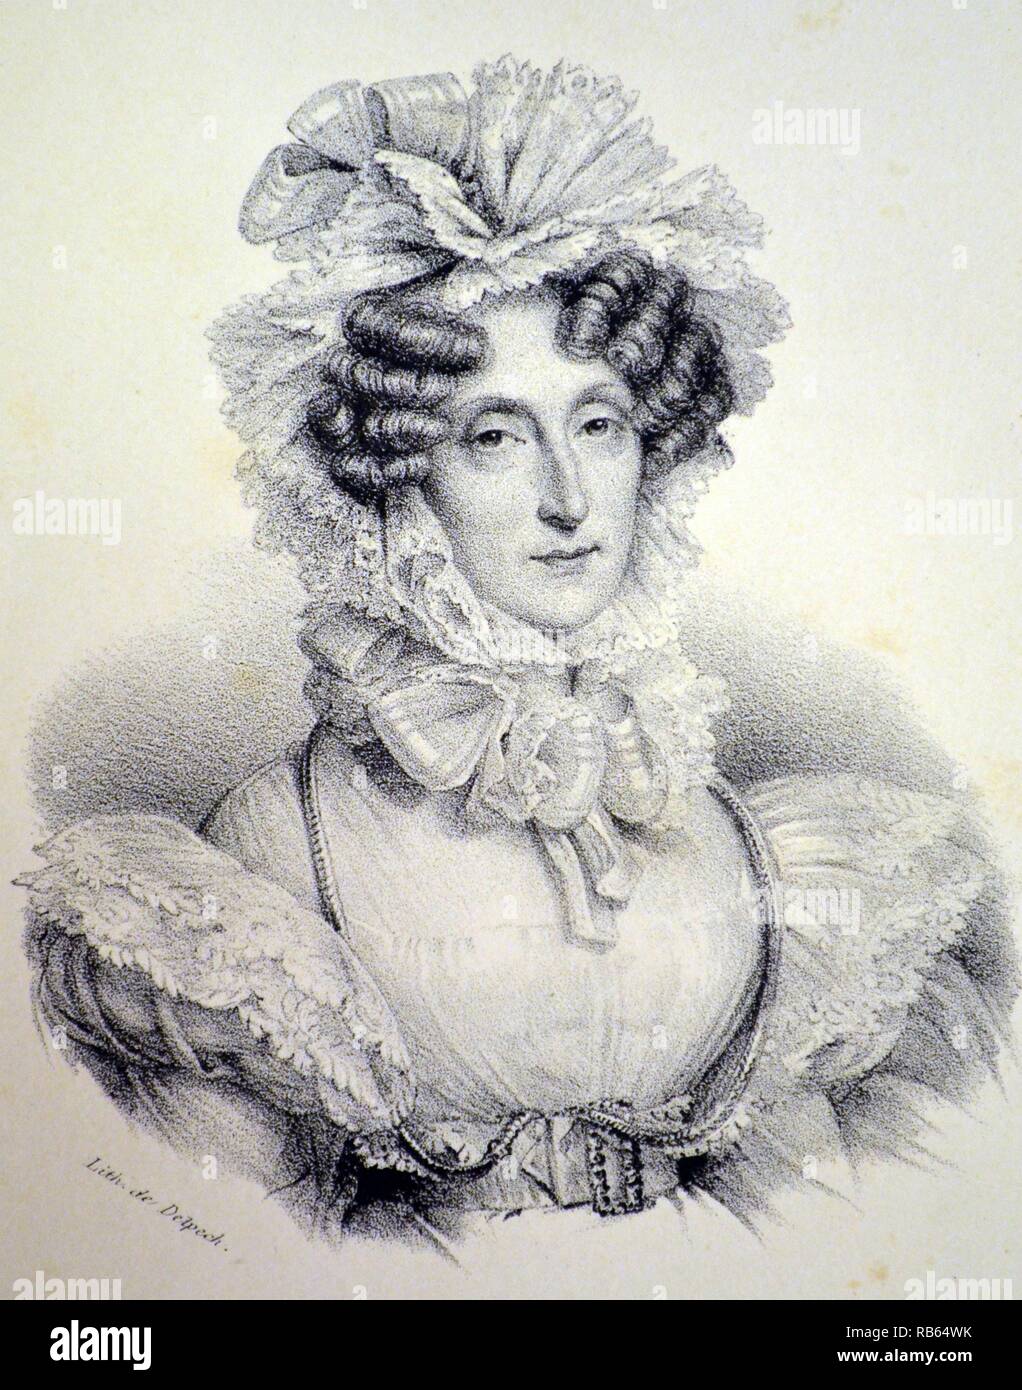 Maria Amalia of Naples and Sicily (1782-1866) Queen consort of Louis Philippe I of France 1830-1848. Lithograph, Paris, c1840. Stock Photo